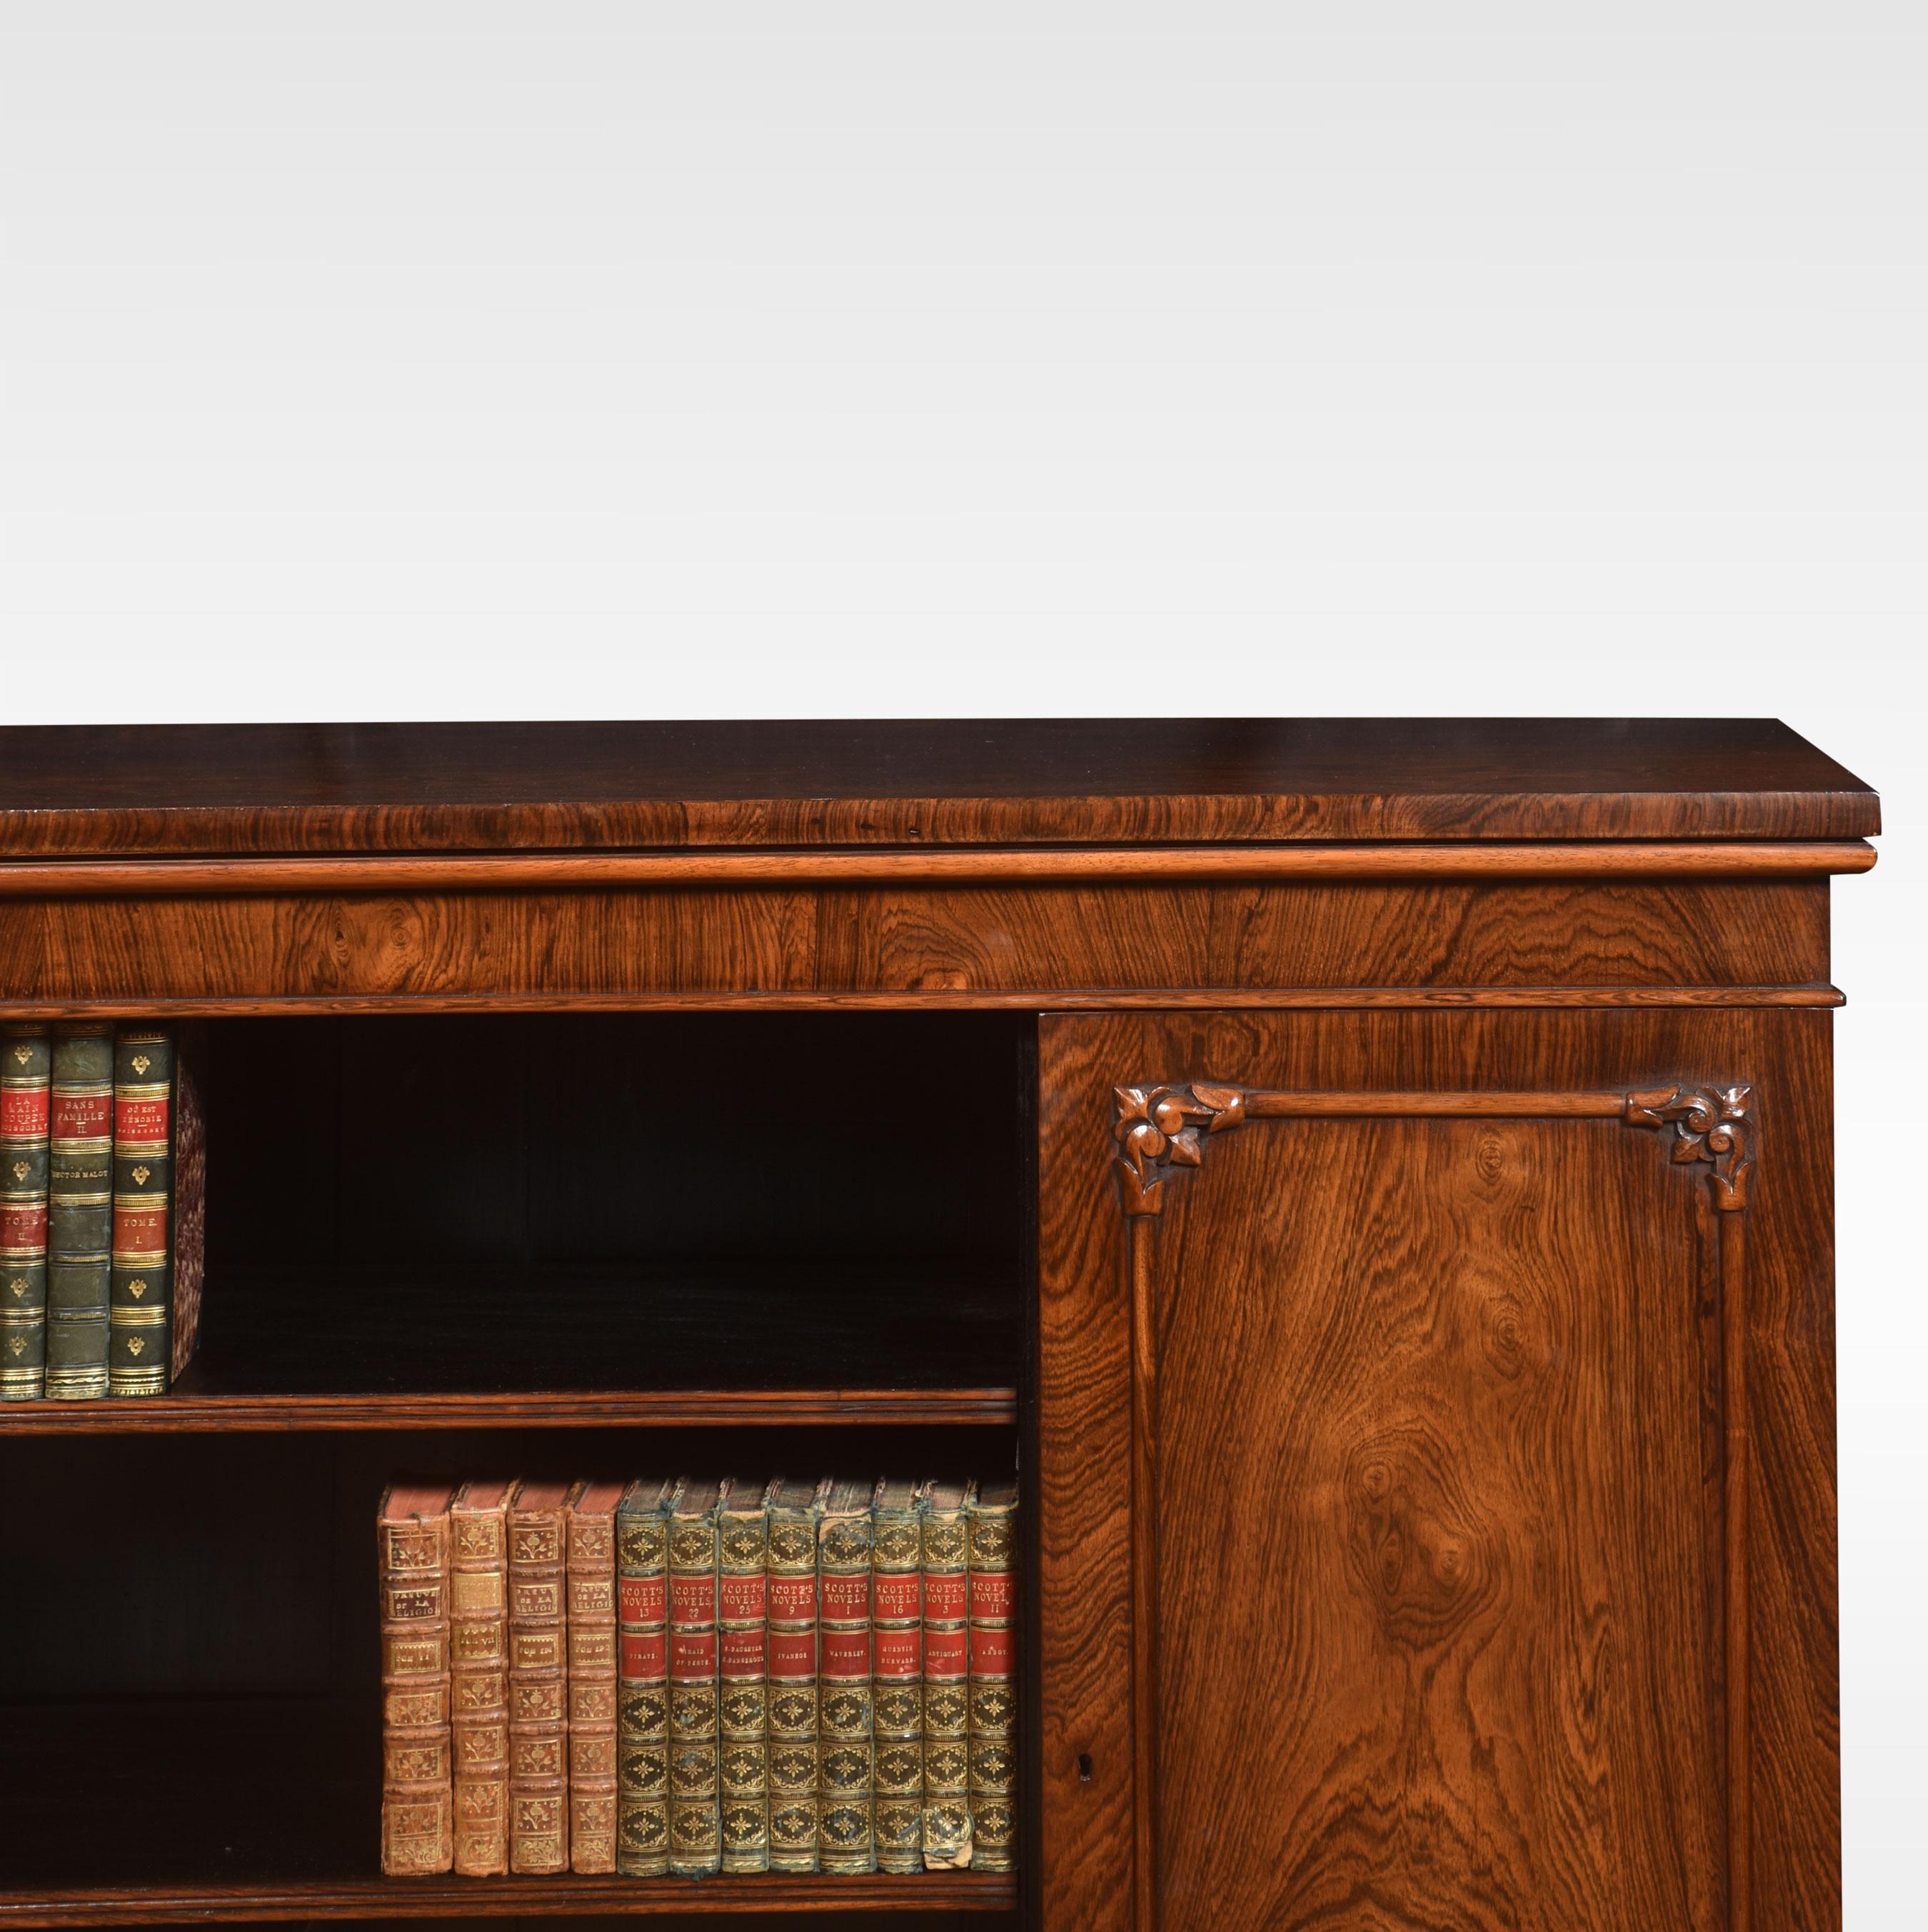 Rosewood bookcase, the large rectangular top above central open bookcase having two adjustable shelves, flanked by well figured paneled doors opening to reveal further shelving. All raised up on plinth base.
Dimensions
Height 36 Inches
Width 58